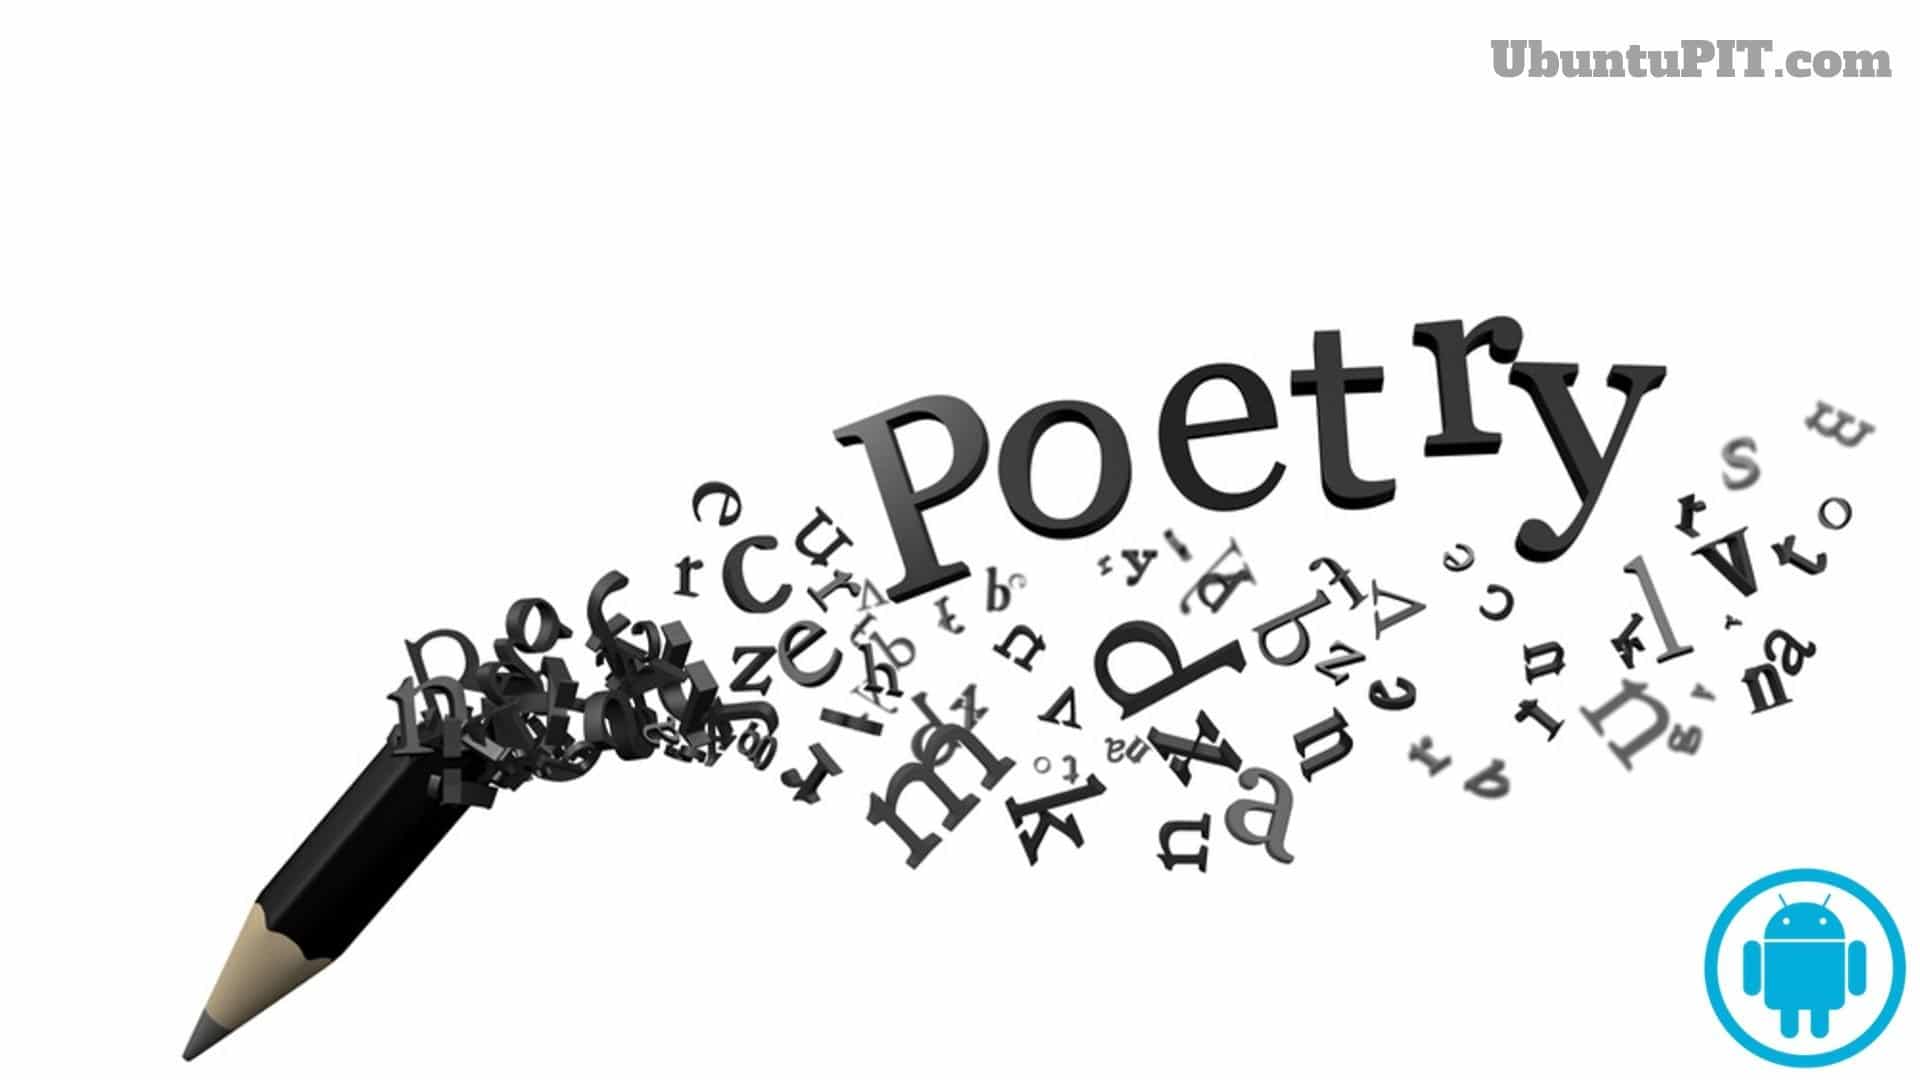 app for mac computer to write poems and short stories